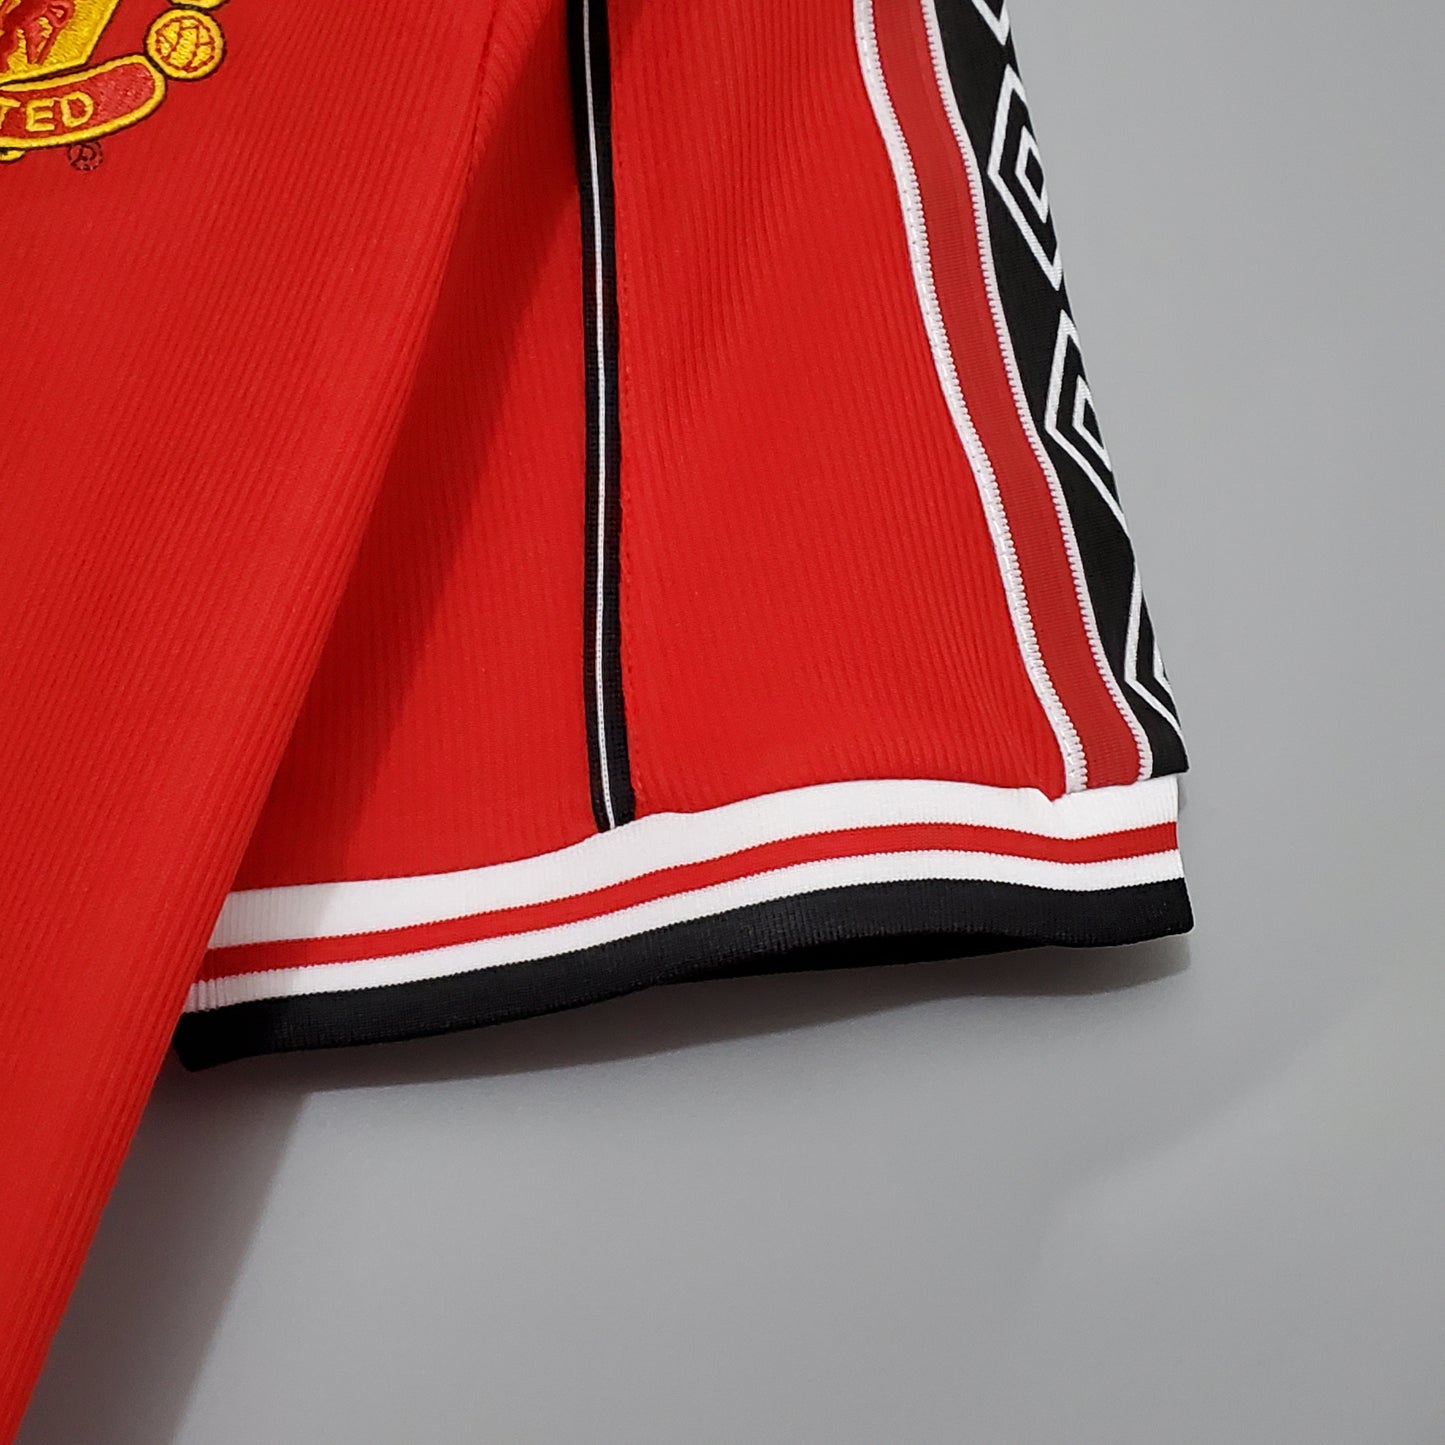 Manchester United 1998/99 Home Jersey